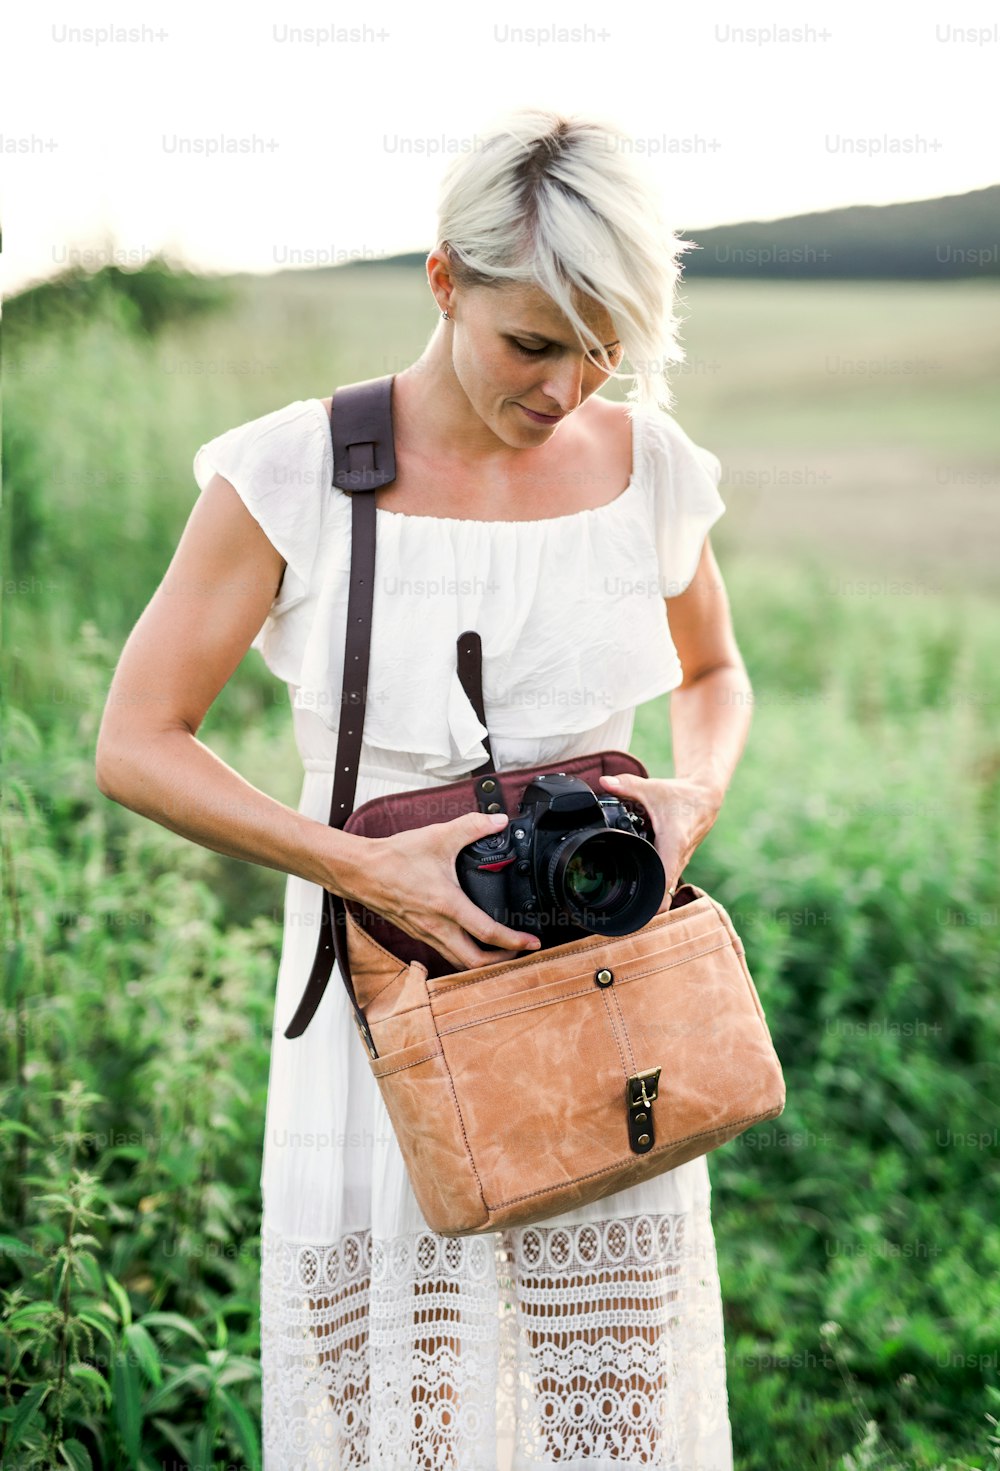 A front view of young woman in nature taking out a camera from a brown leather bag.